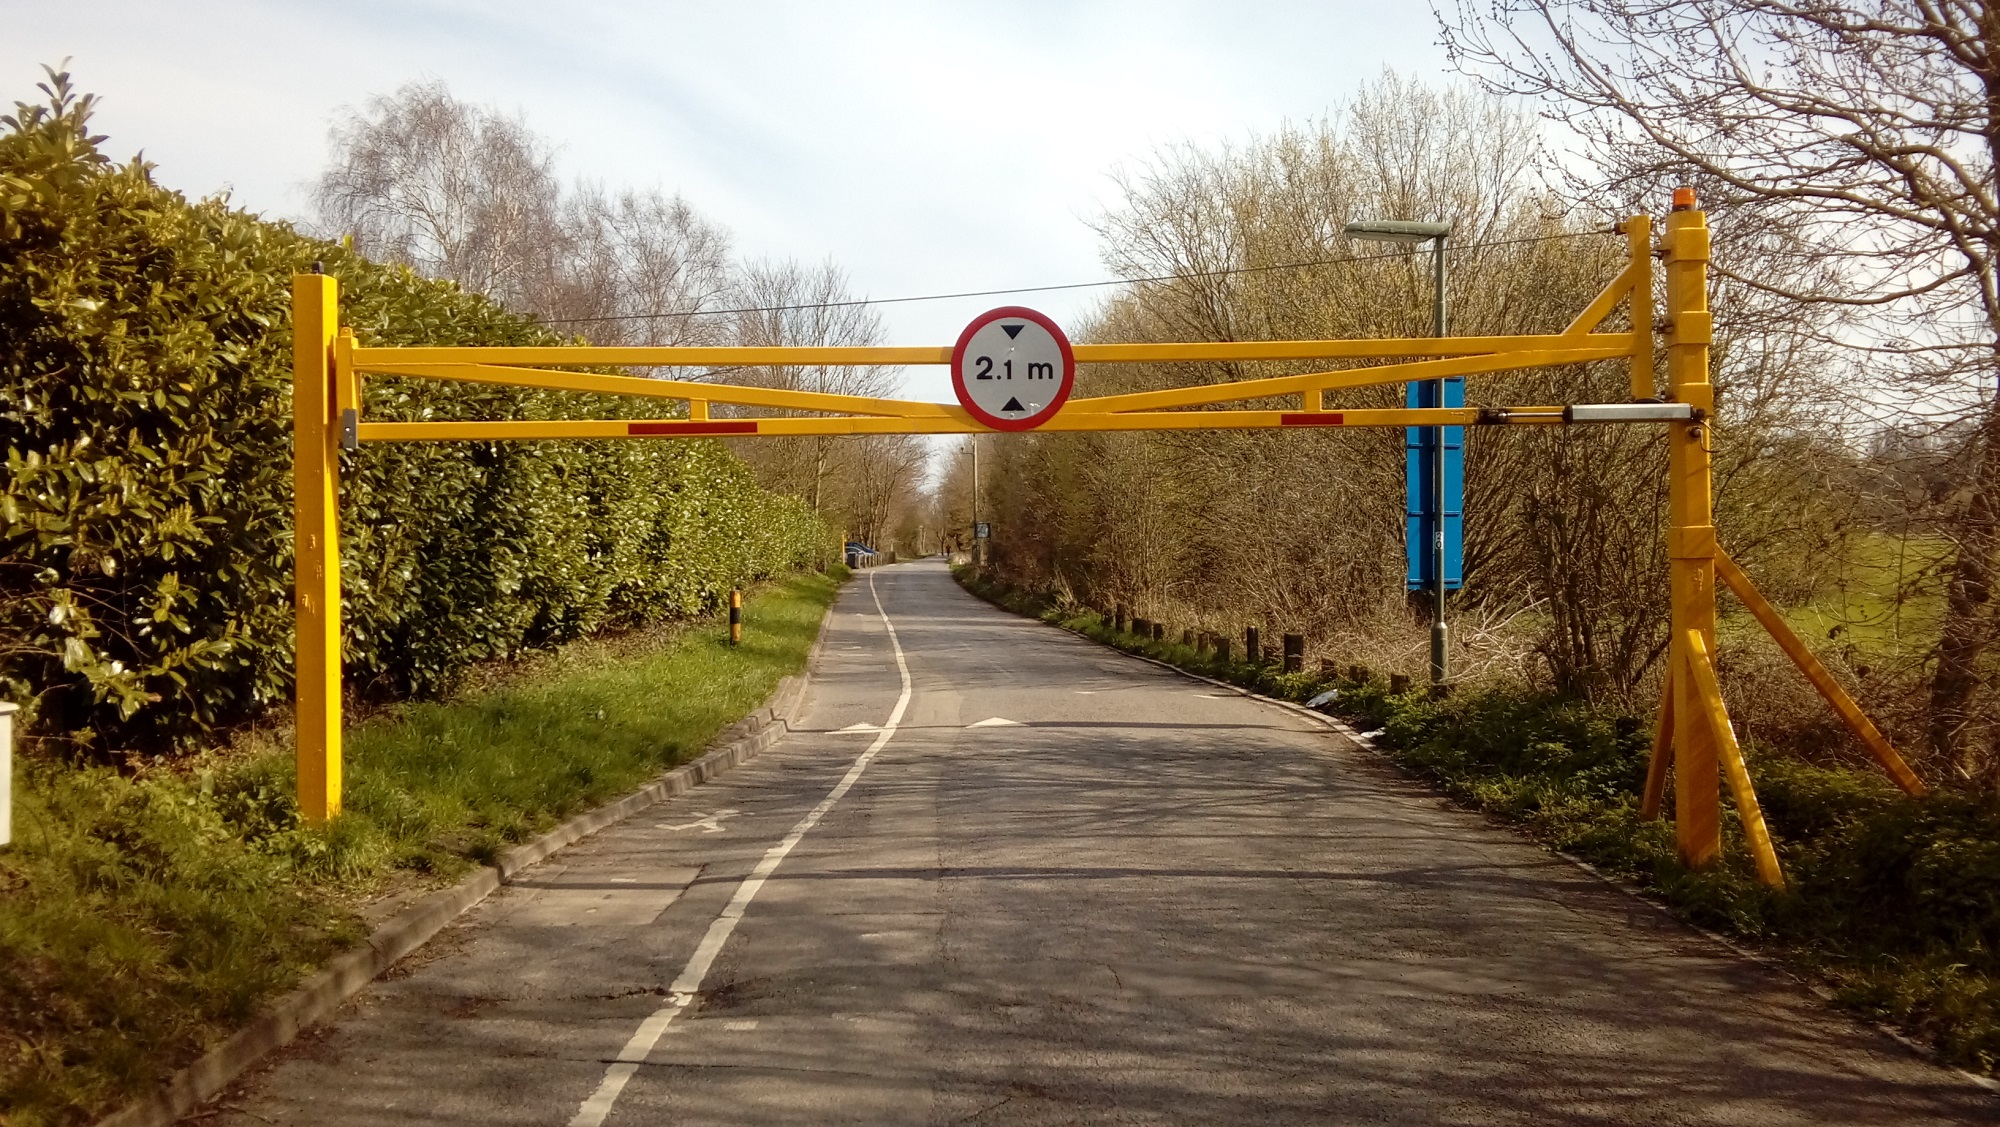 A yellow metal height restriction gate placed on a road viewed on a sunny day.